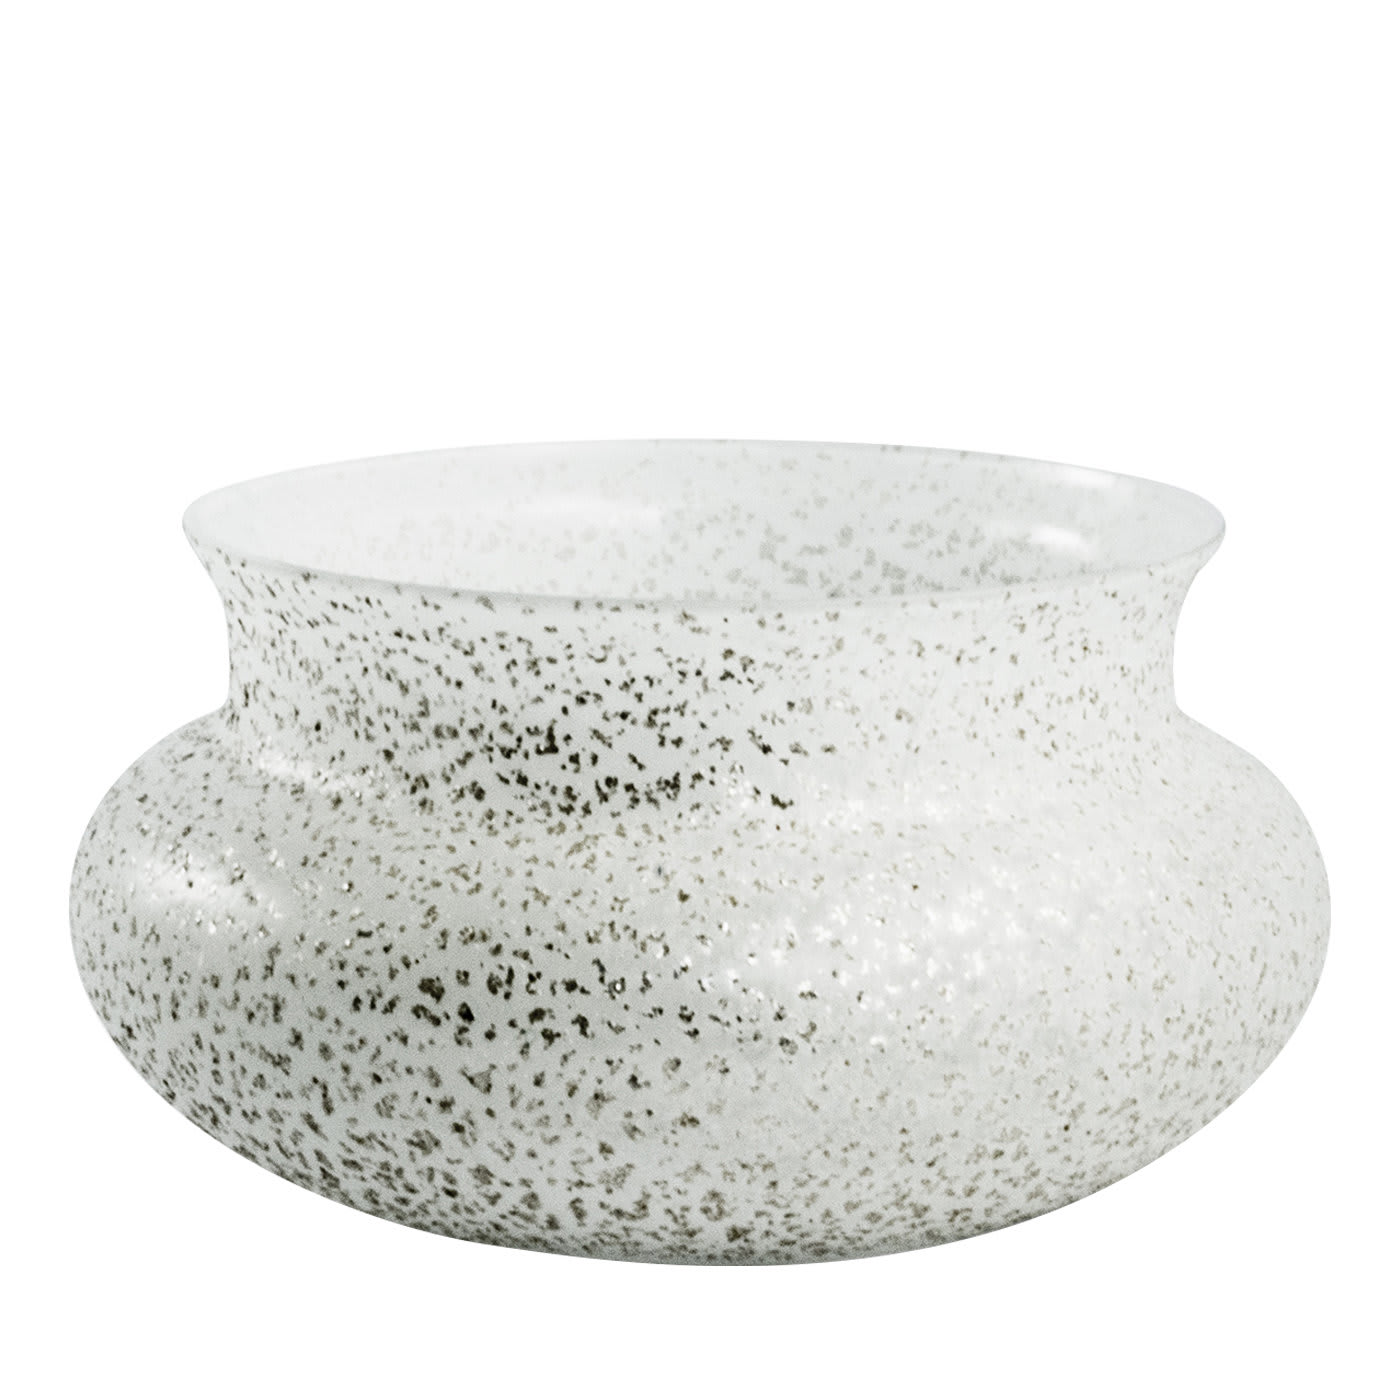 Tintoretto Large White Bowl - Dogale